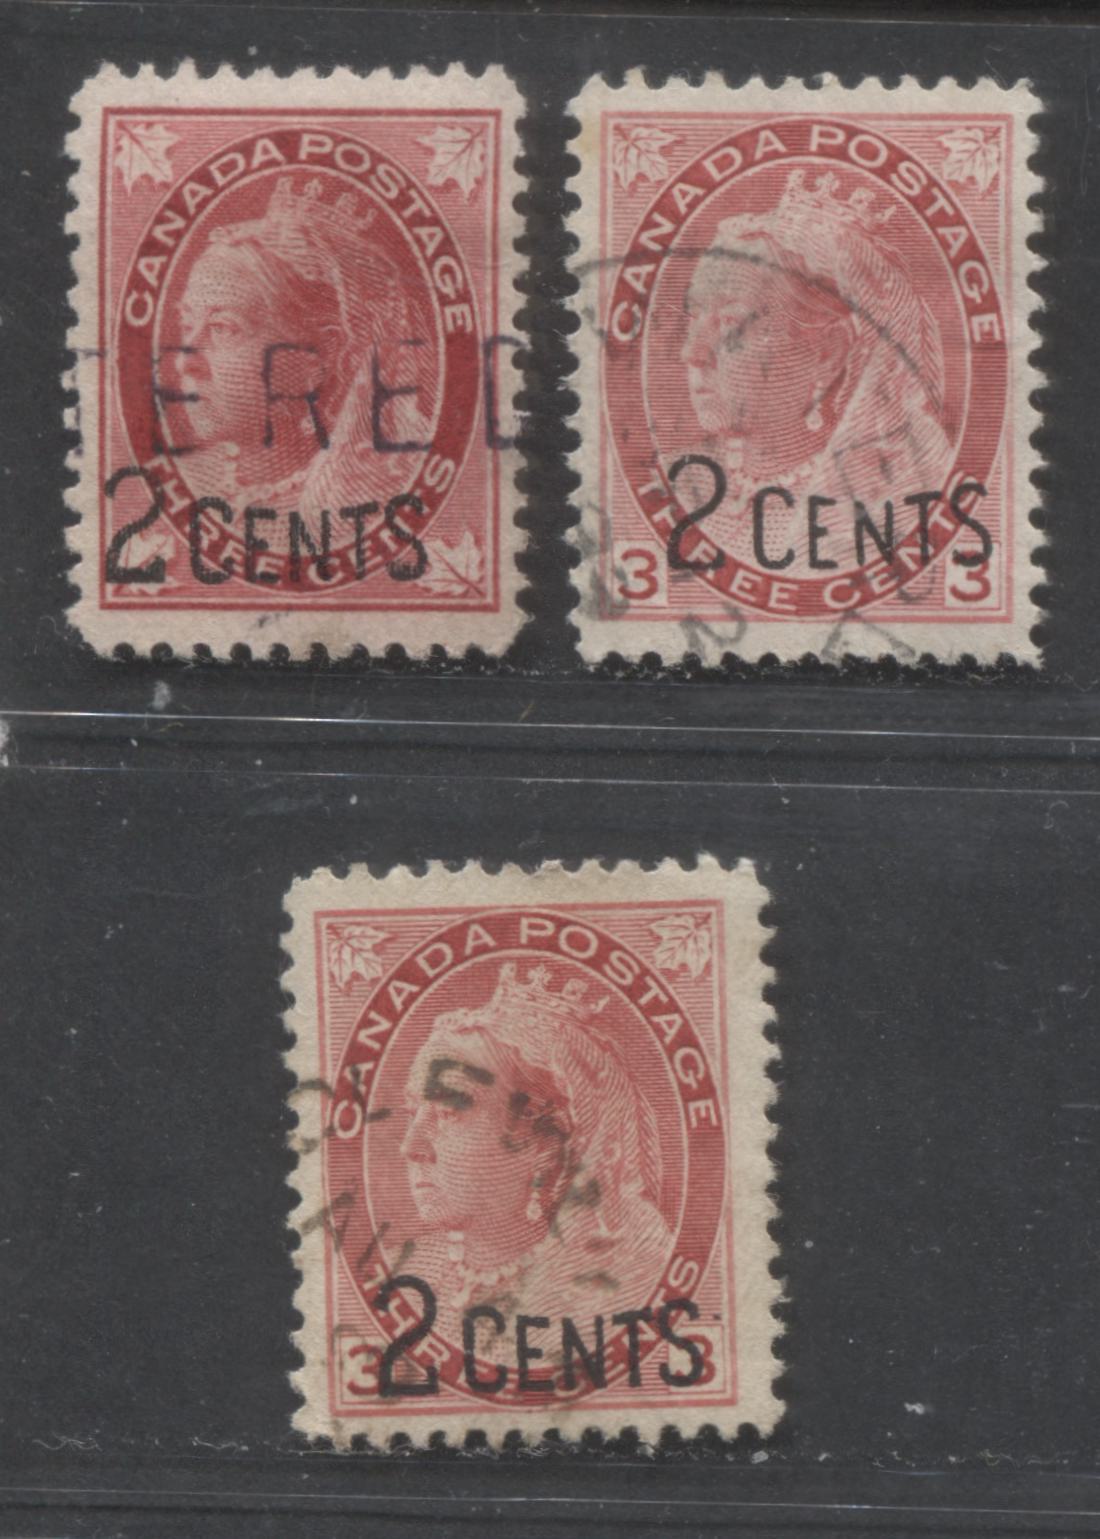 Lot 265 Canada #87-88 2c on 3c Carmine Queen Victoria, 1899 Surcharges, 3 VF Used Singles, Different Shades and Thickness of Overprint